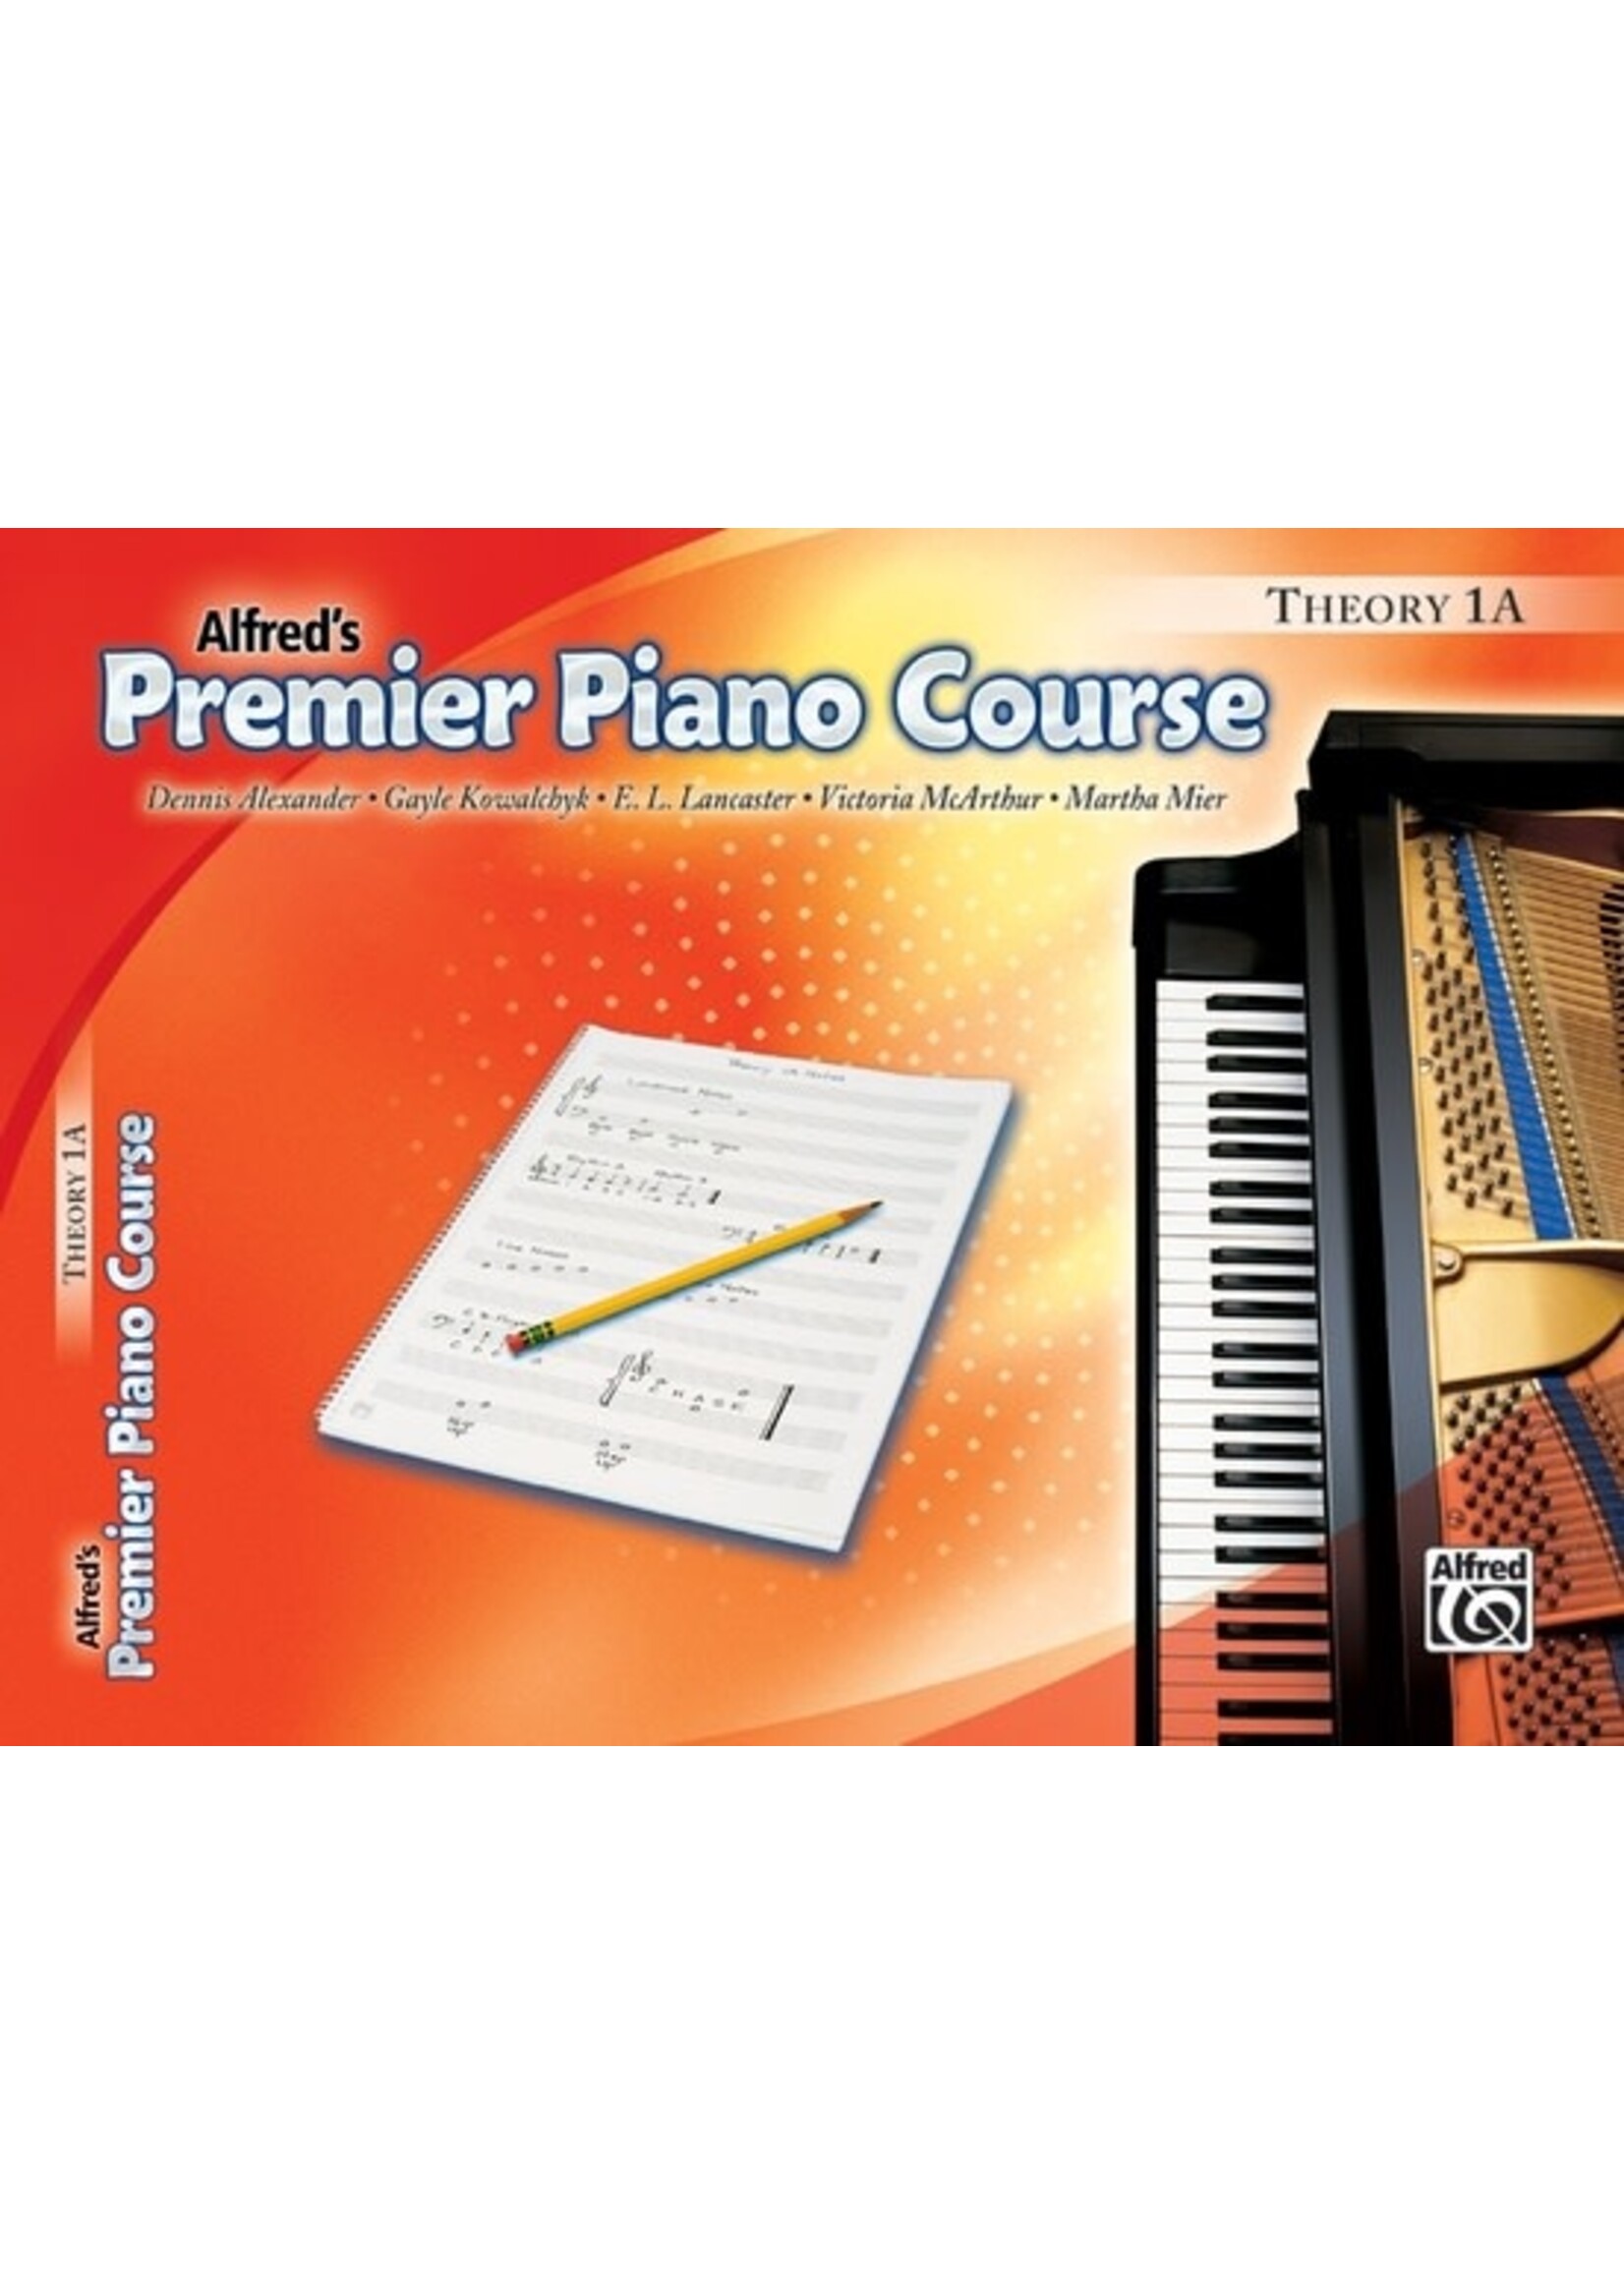 Alfred Alfred's Premier Piano Course Theory 1A